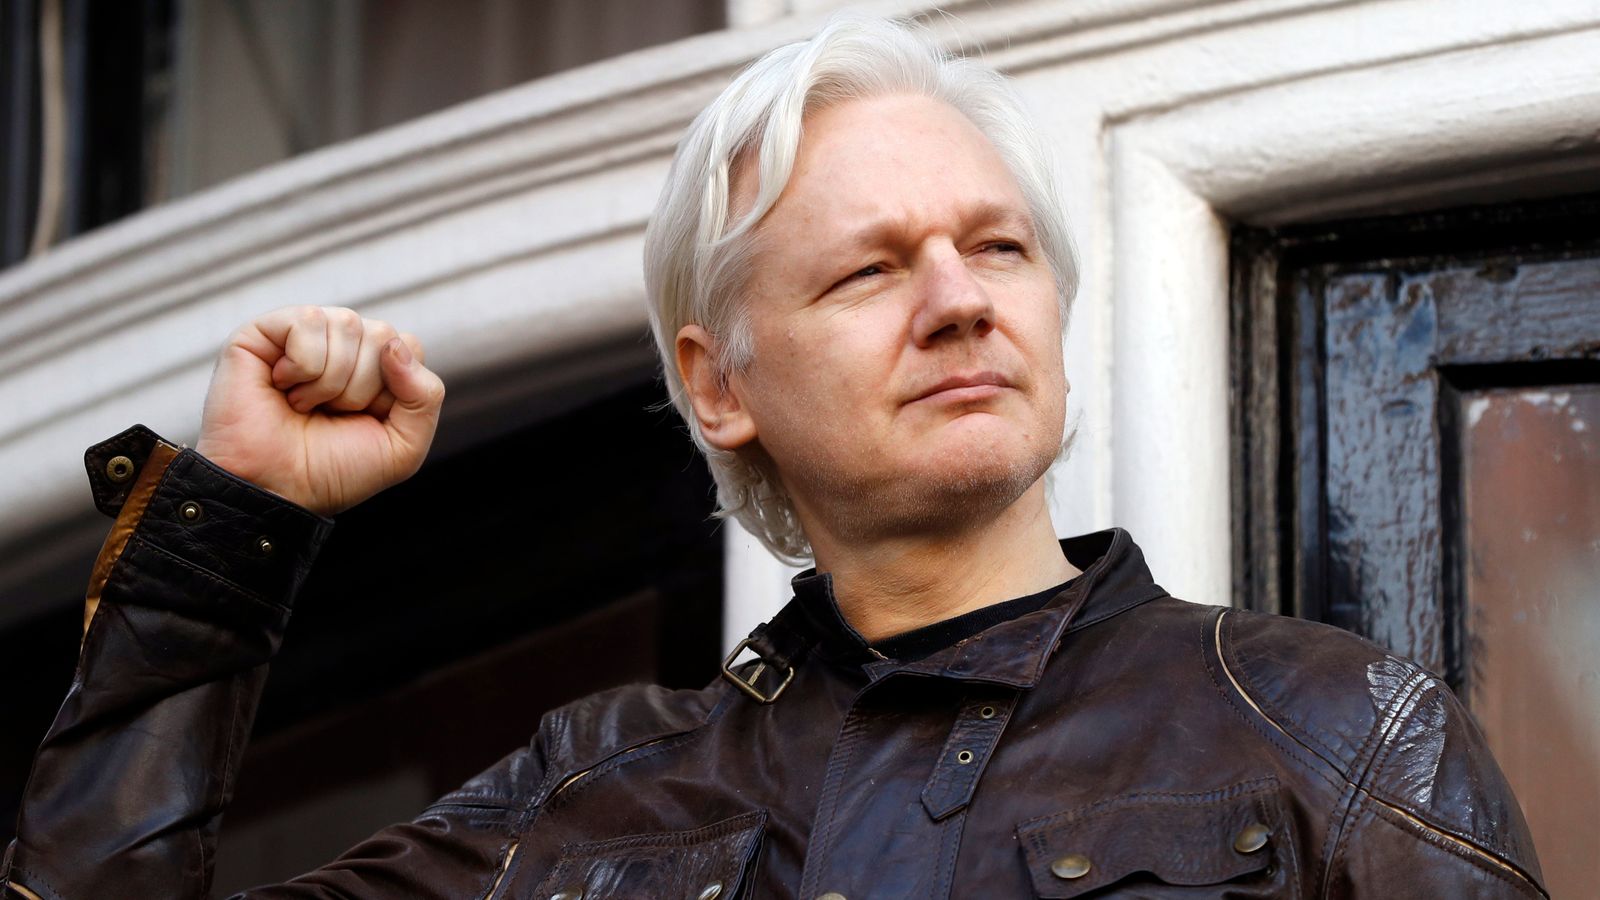 Why is Julian Assange in court again - and what might happen if he's extradited to the US?